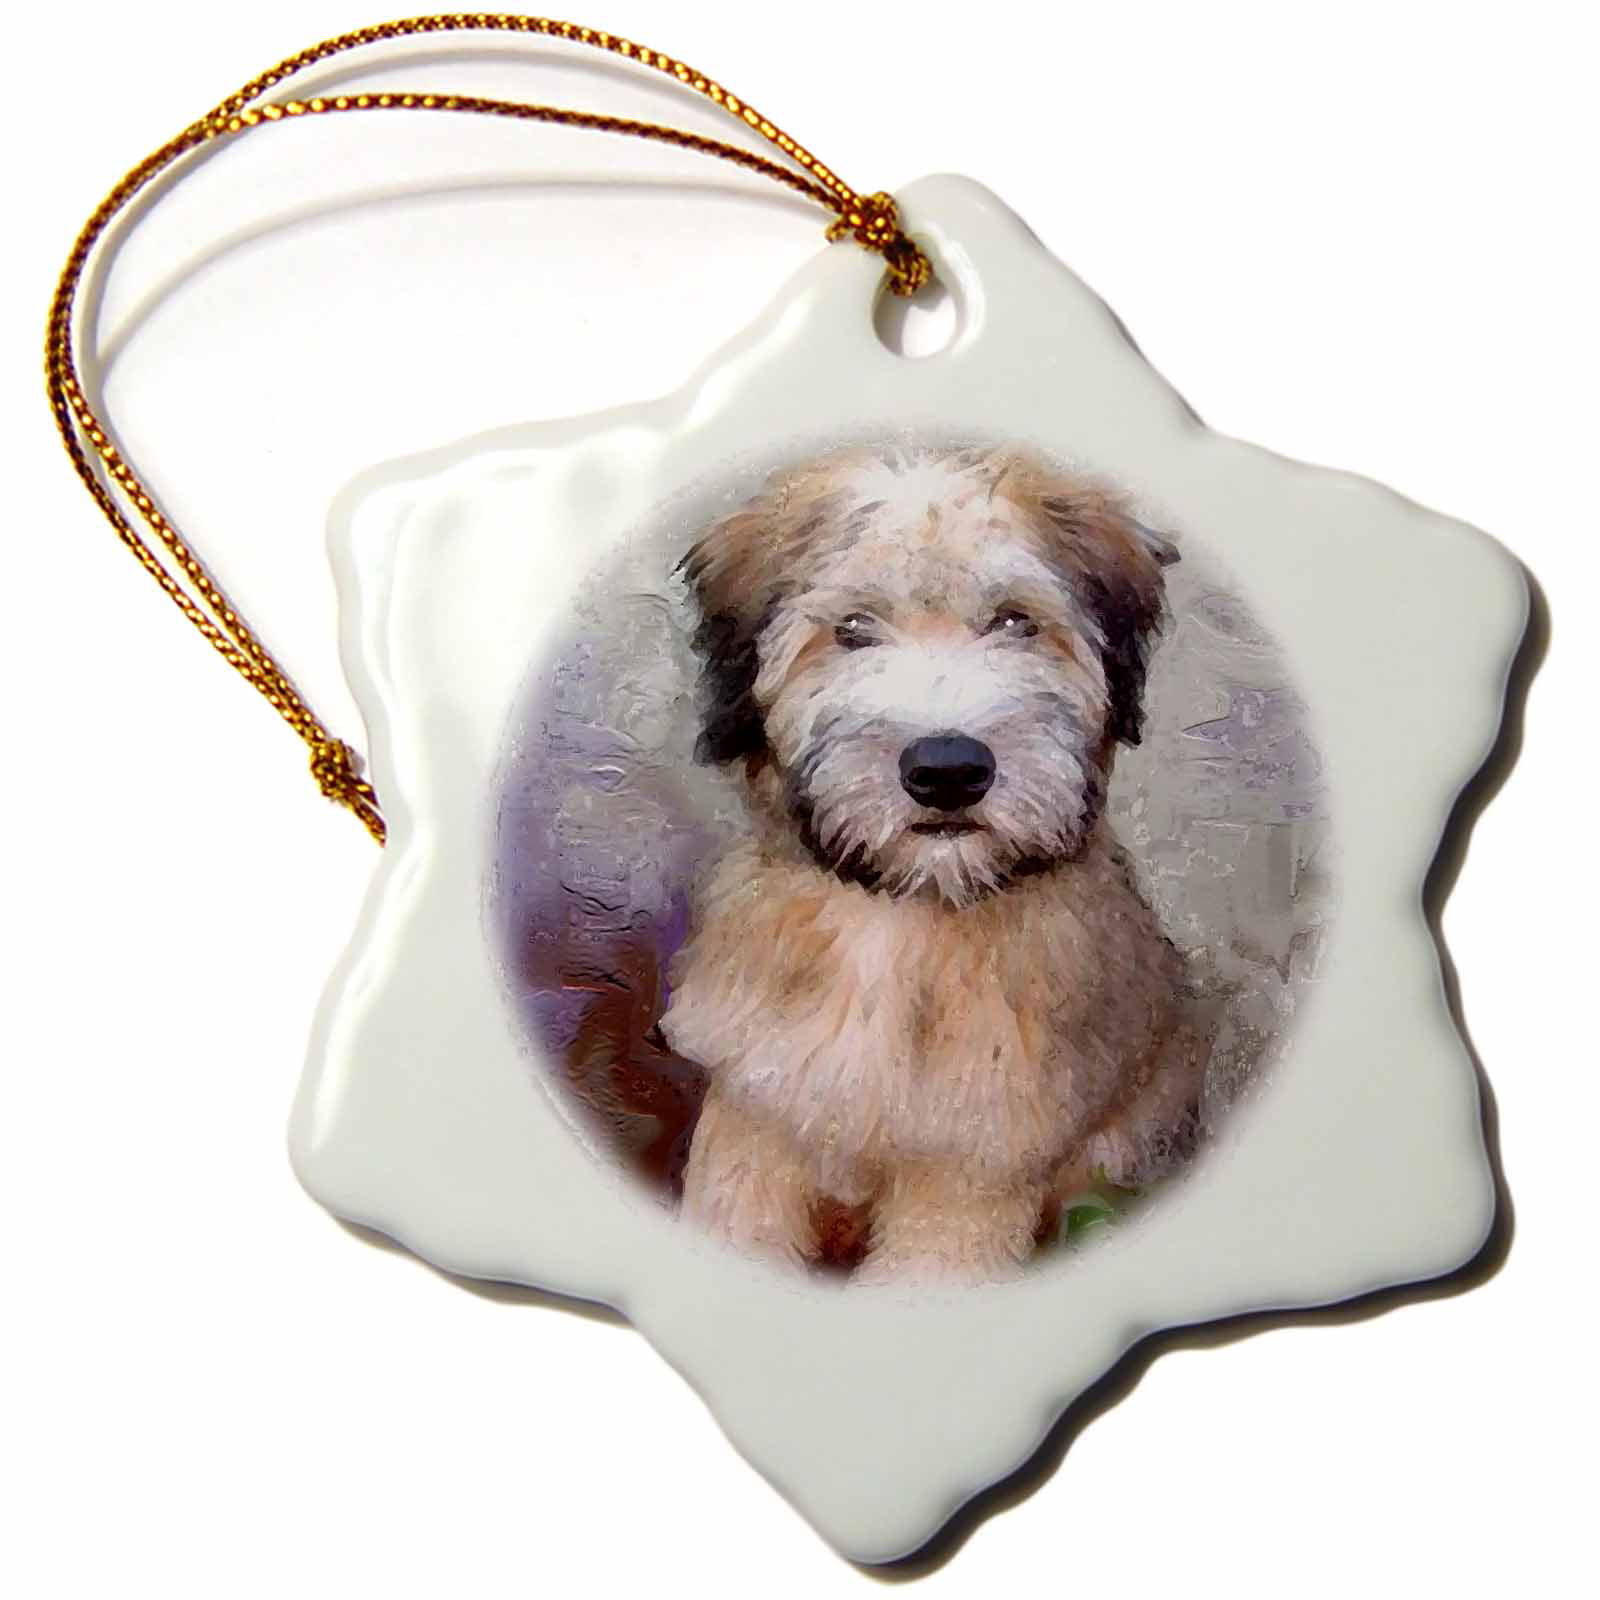 3dRose Soft Coated Wheaten Terrier - Snowflake Ornament, 3-inch ...